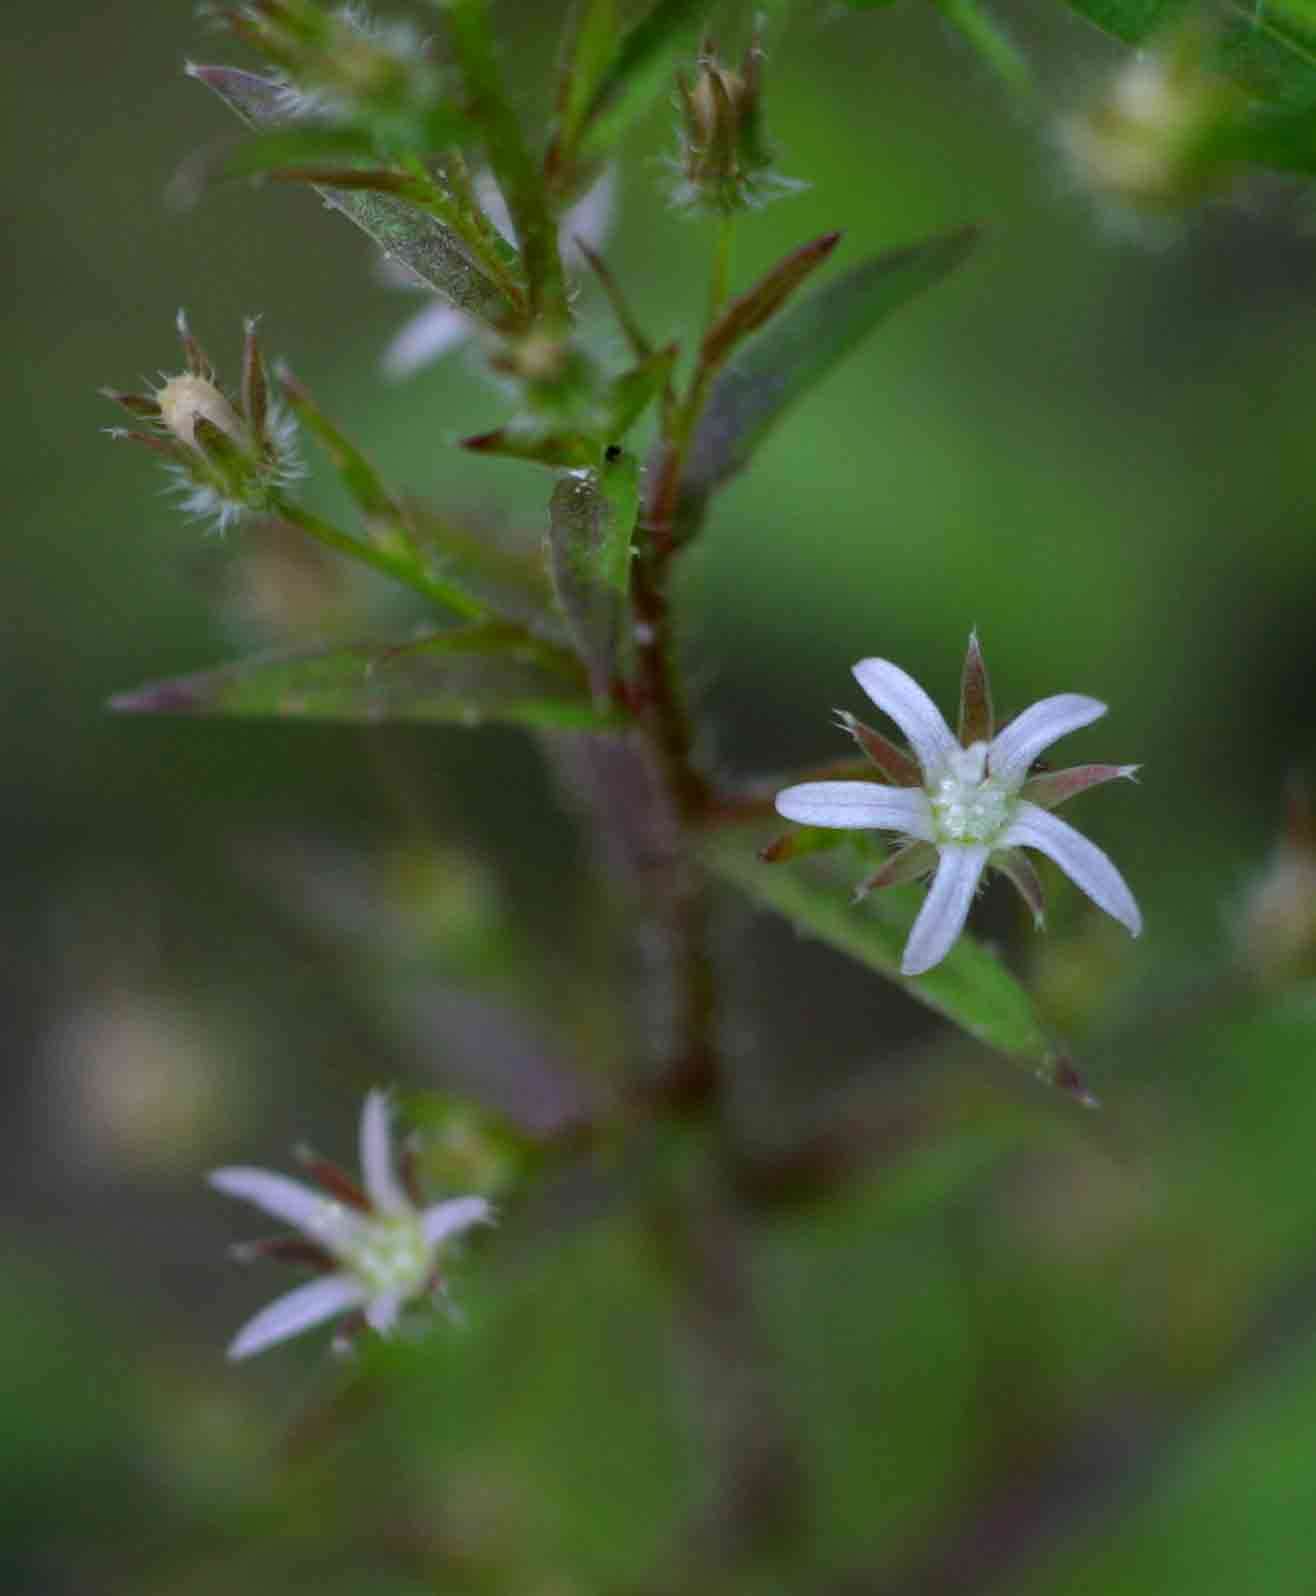 Image of Wahlenbergia erecta (Roth ex Schult.) Tuyn